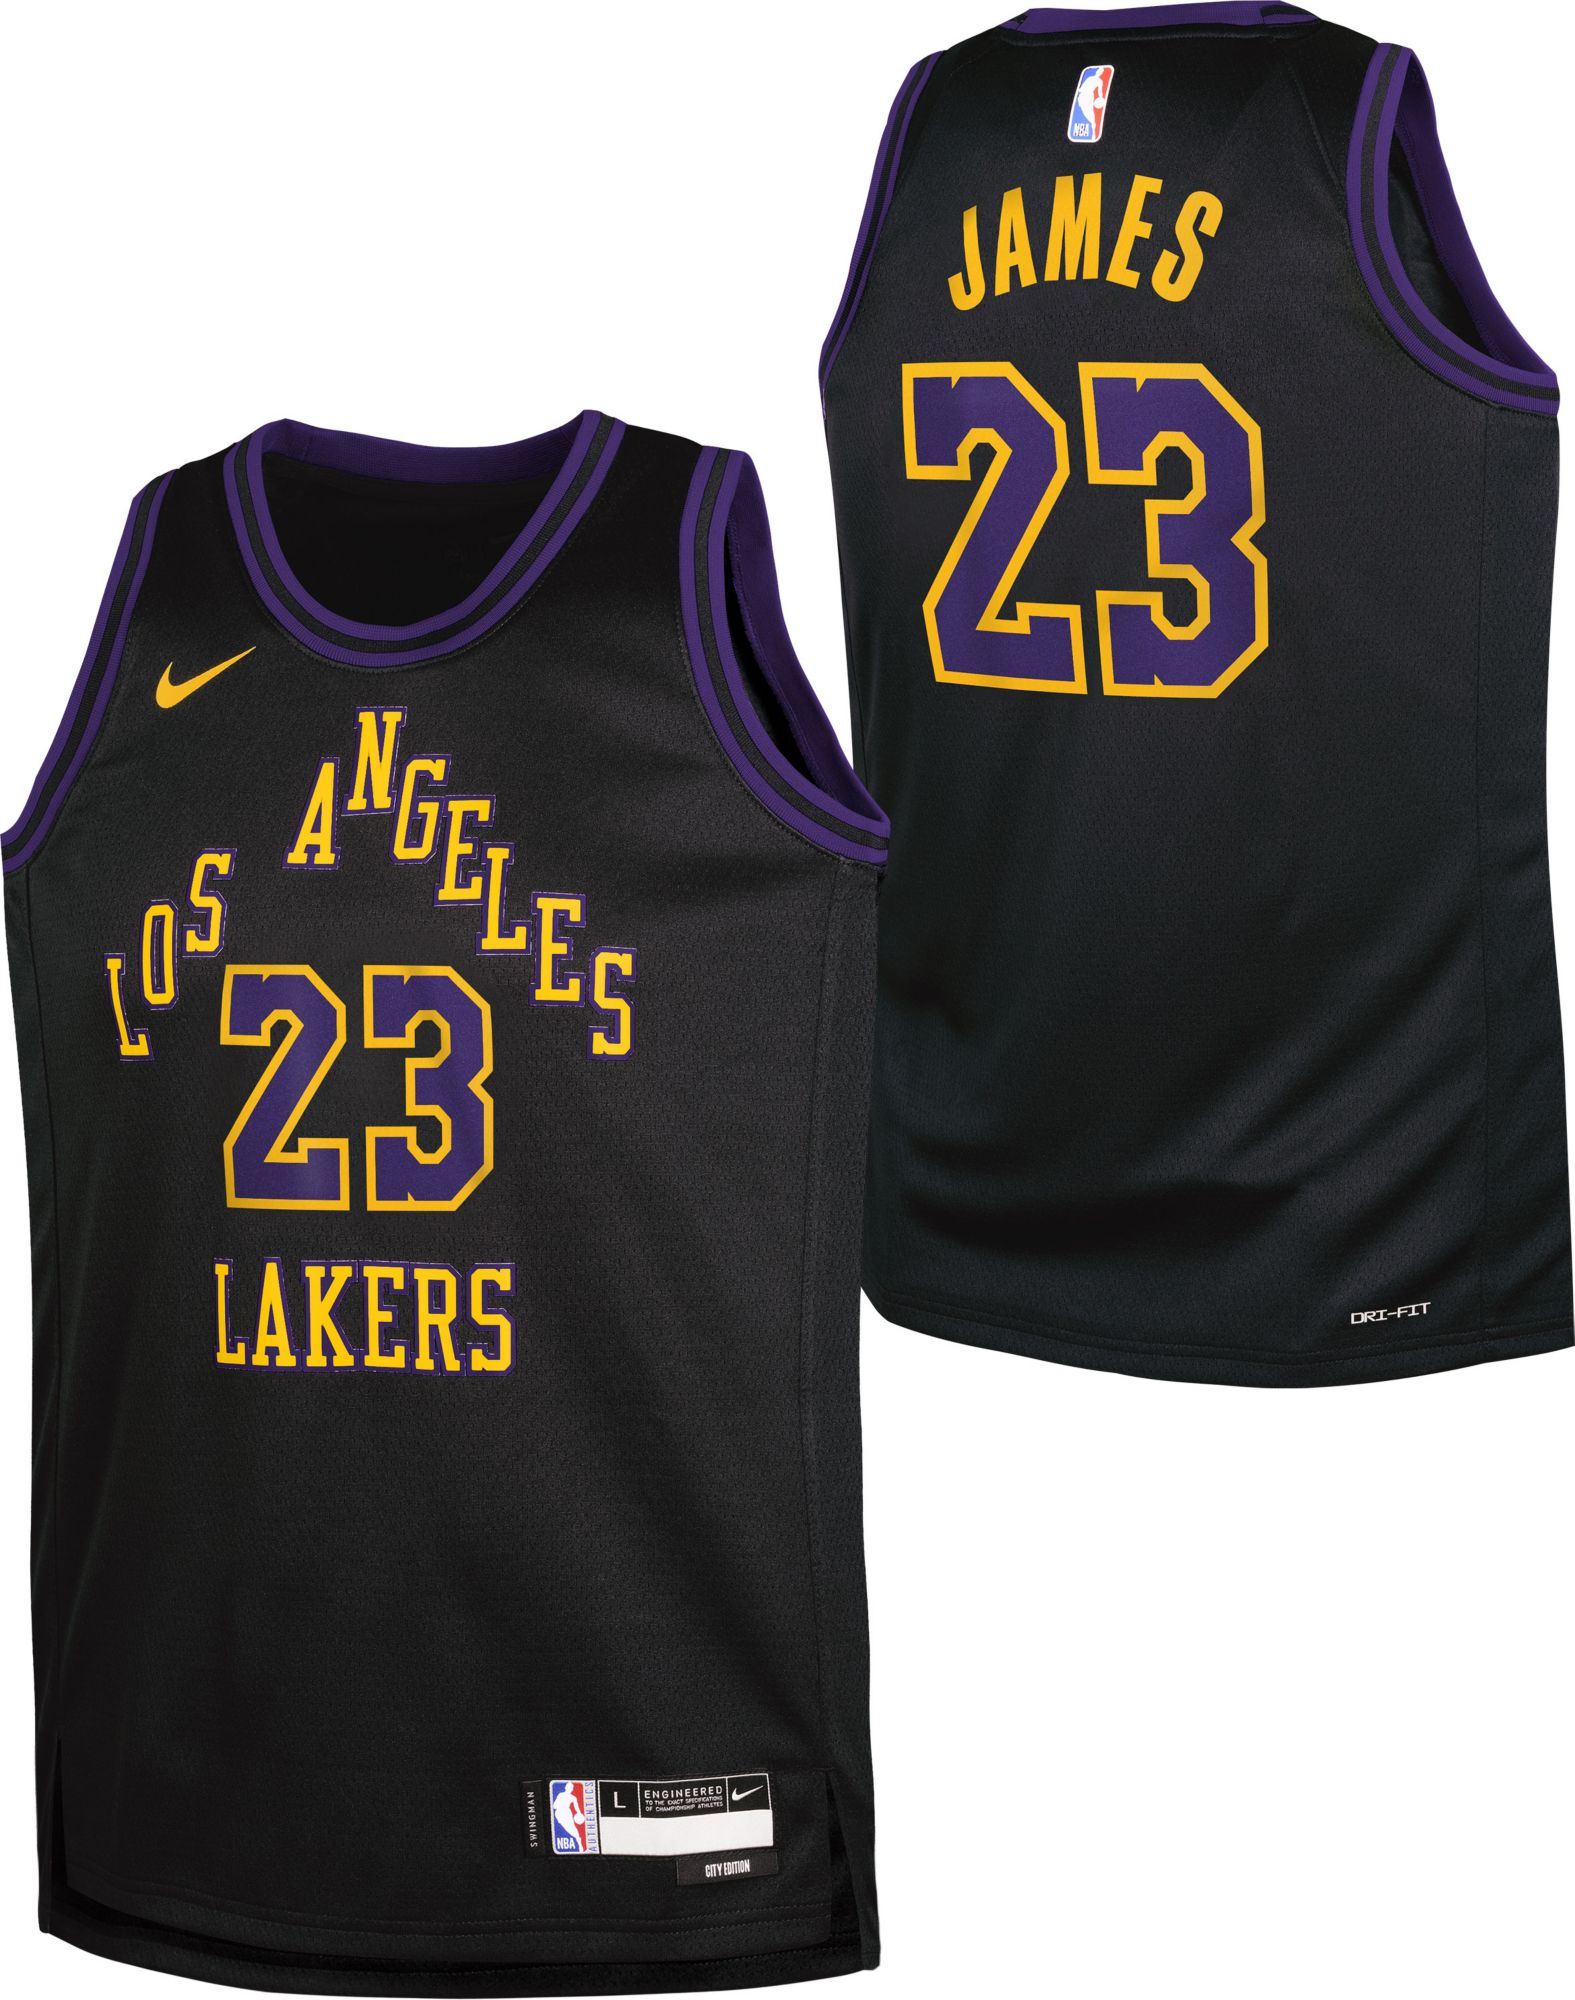 James Harris youth jersey